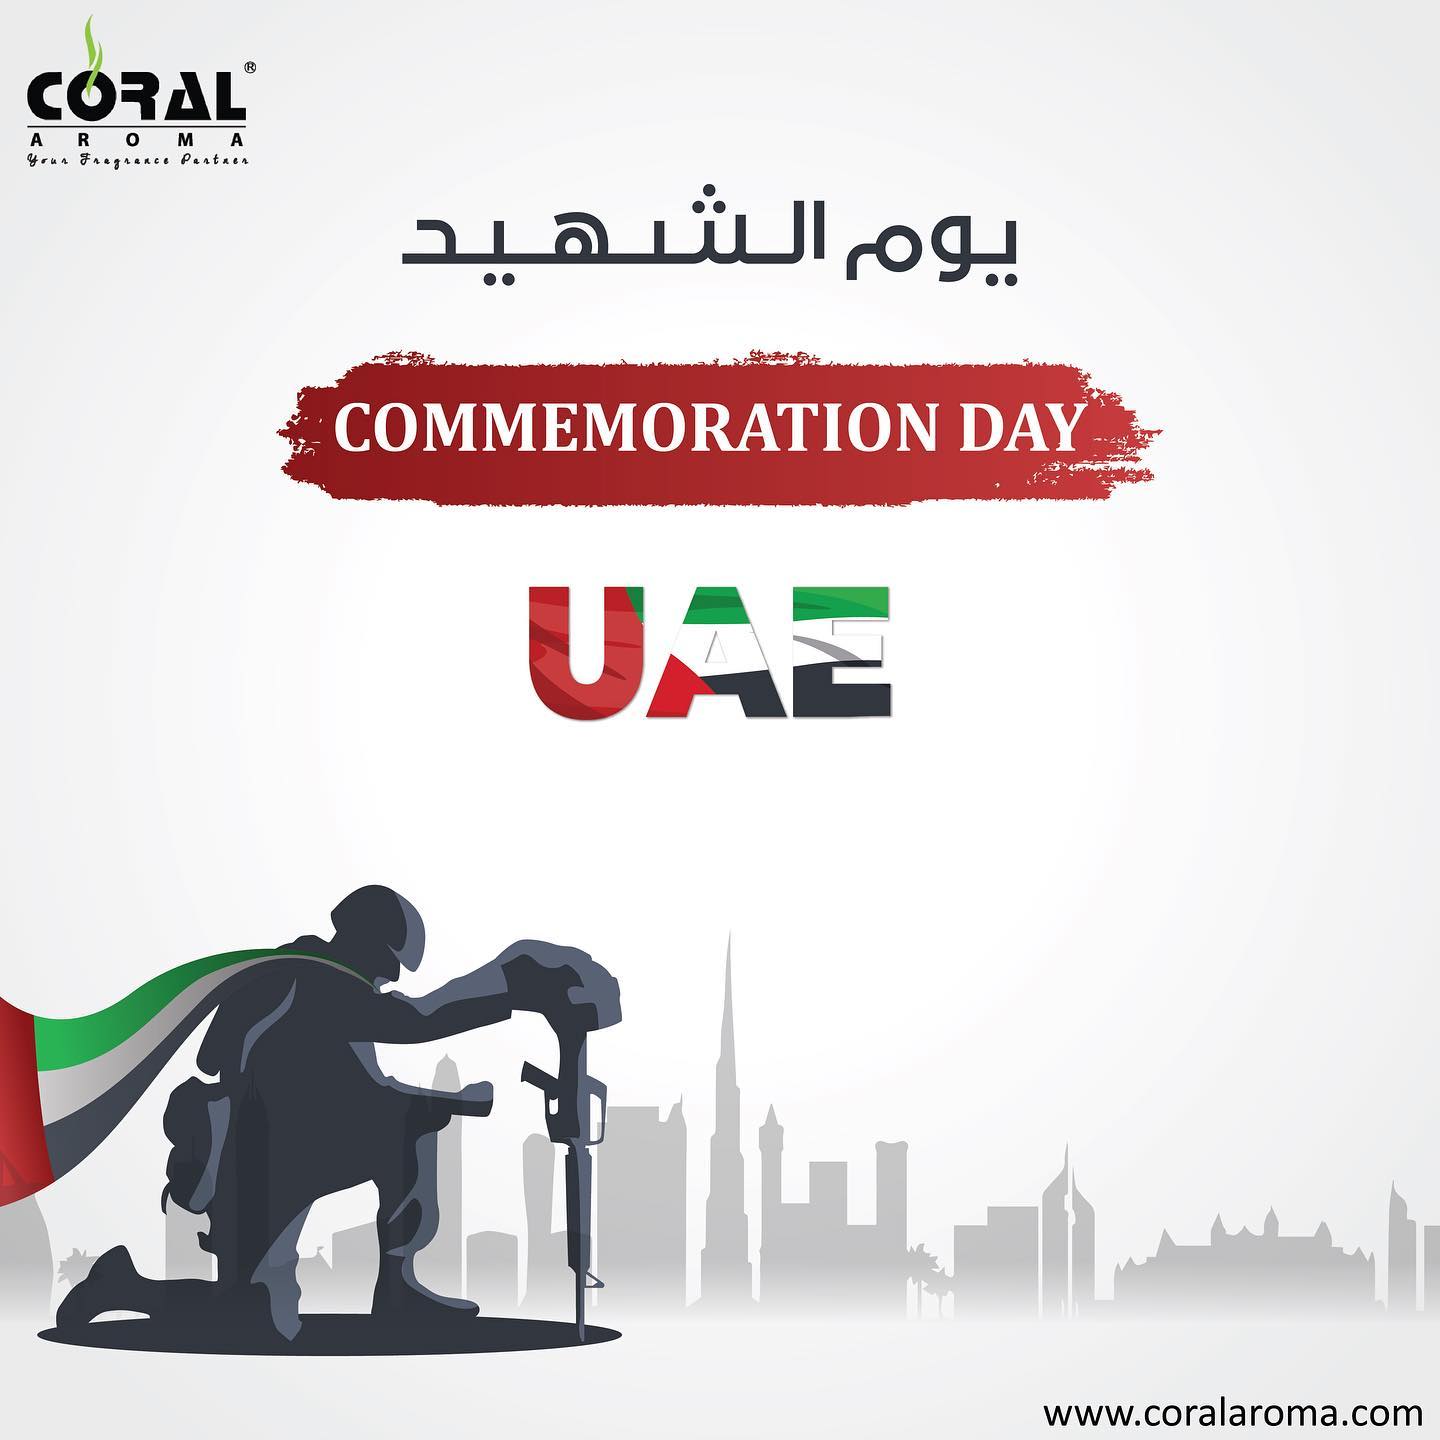 In Honor & Remembrance of the Martyrs who sacrificed their lives serving 🇦🇪….
WE SALUTE YOU❤️🇦🇪

#uaemartyrsday #commemorationday🇦🇪 #uae #coralaroma